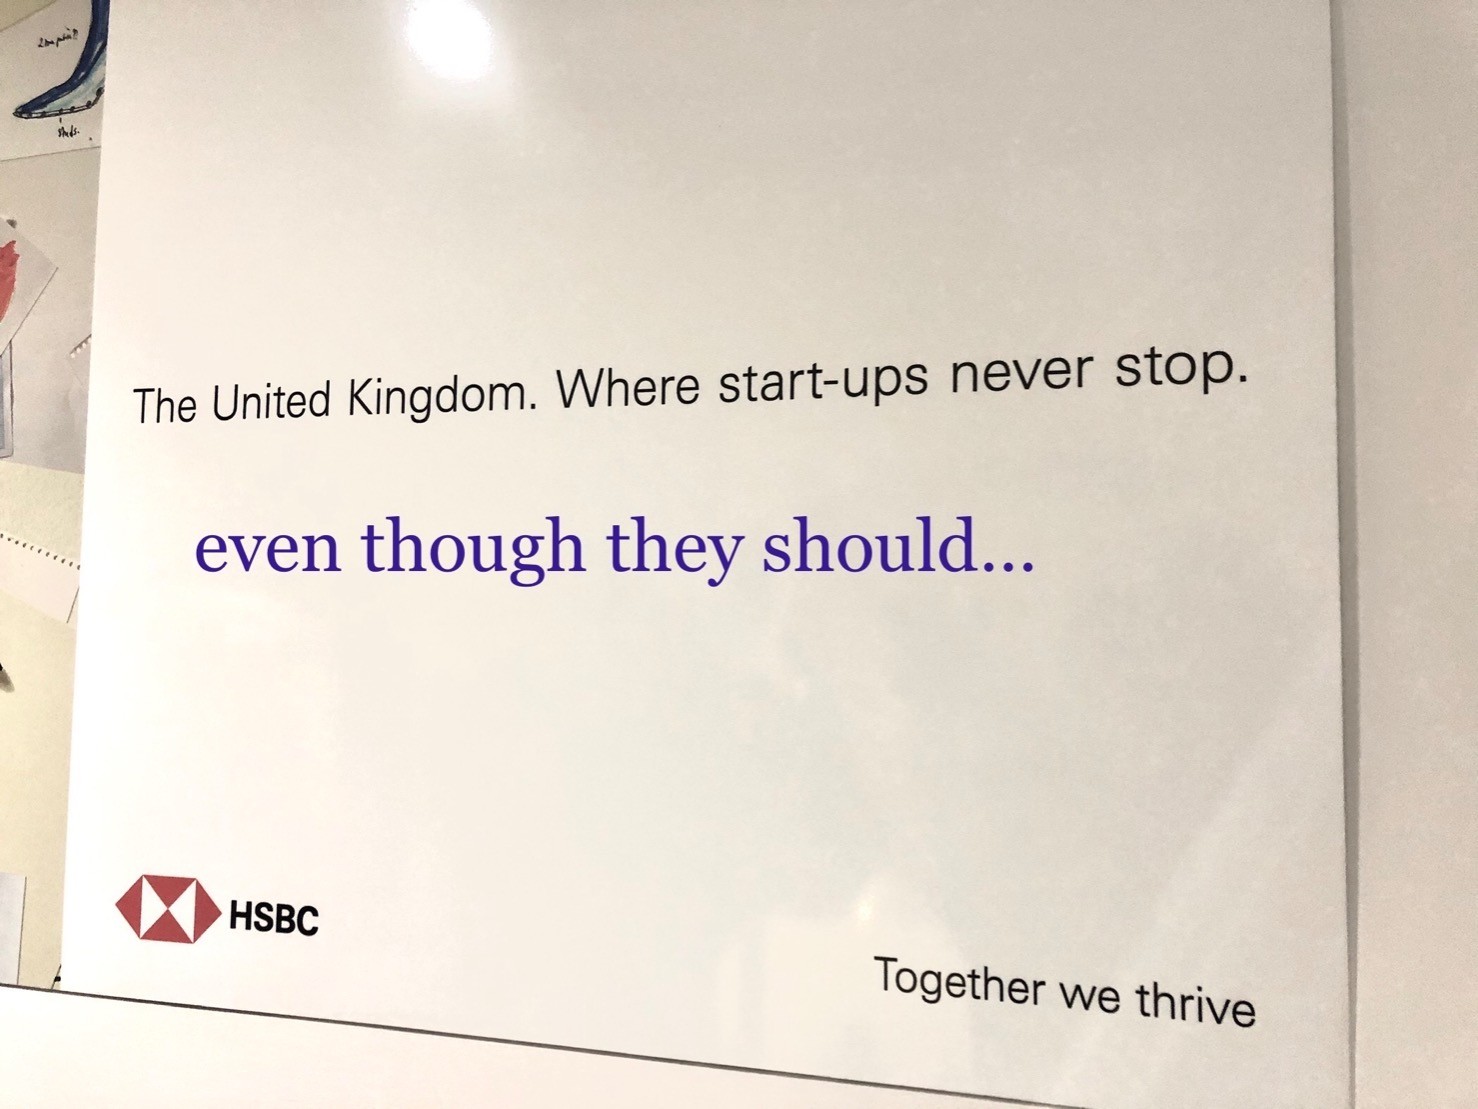 HSBC ad saying “The United Kingdom. Where start/ups never stop” and my annotation saying “even though they should…”